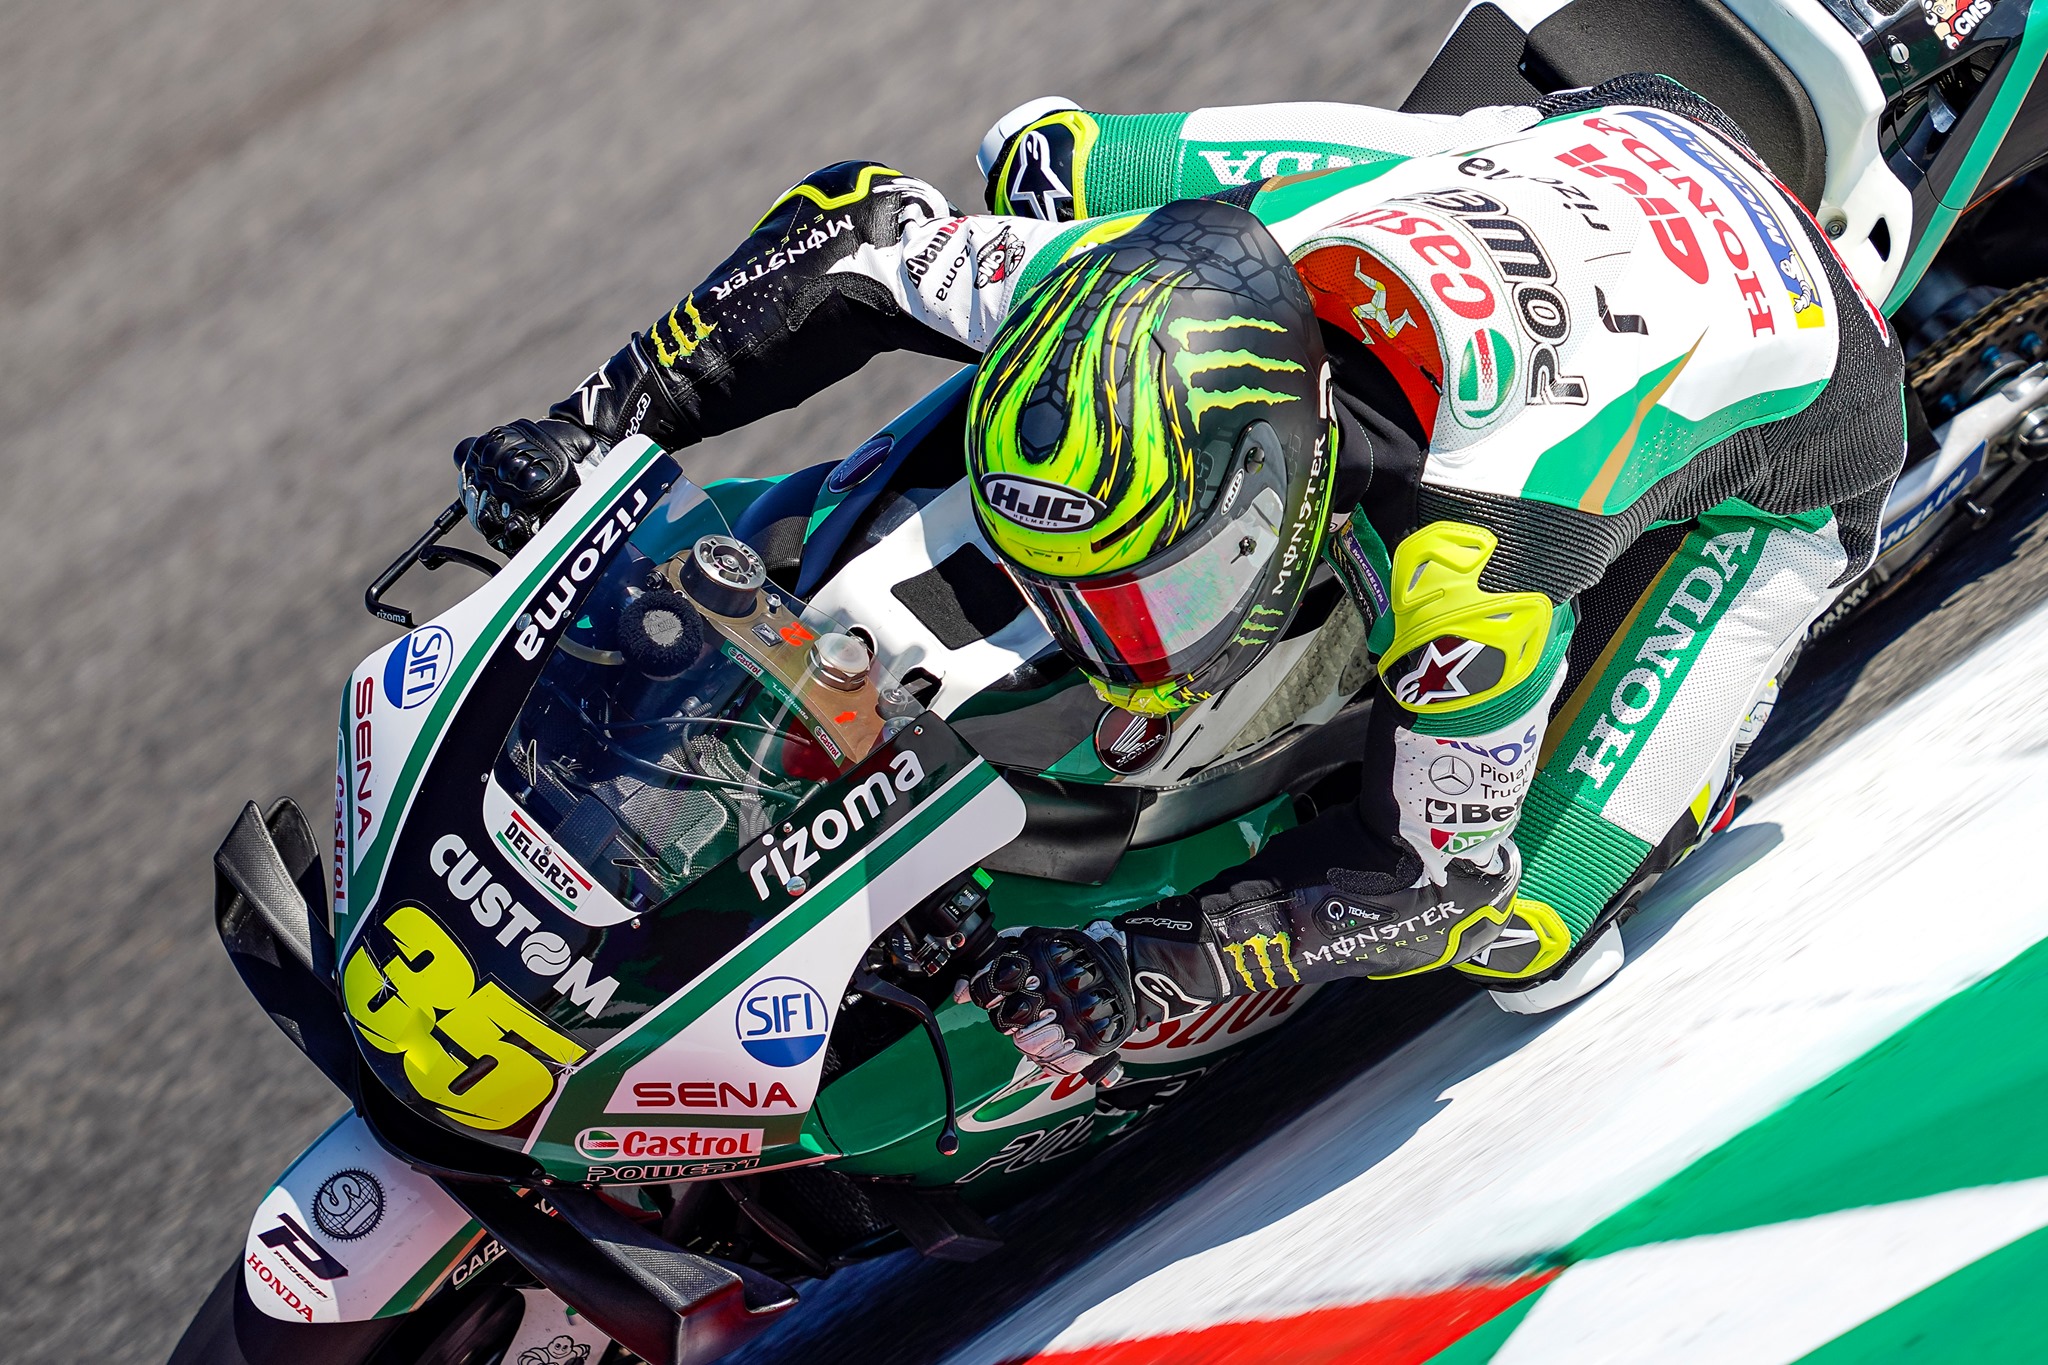 Intensive day for Crutchlow at Misano